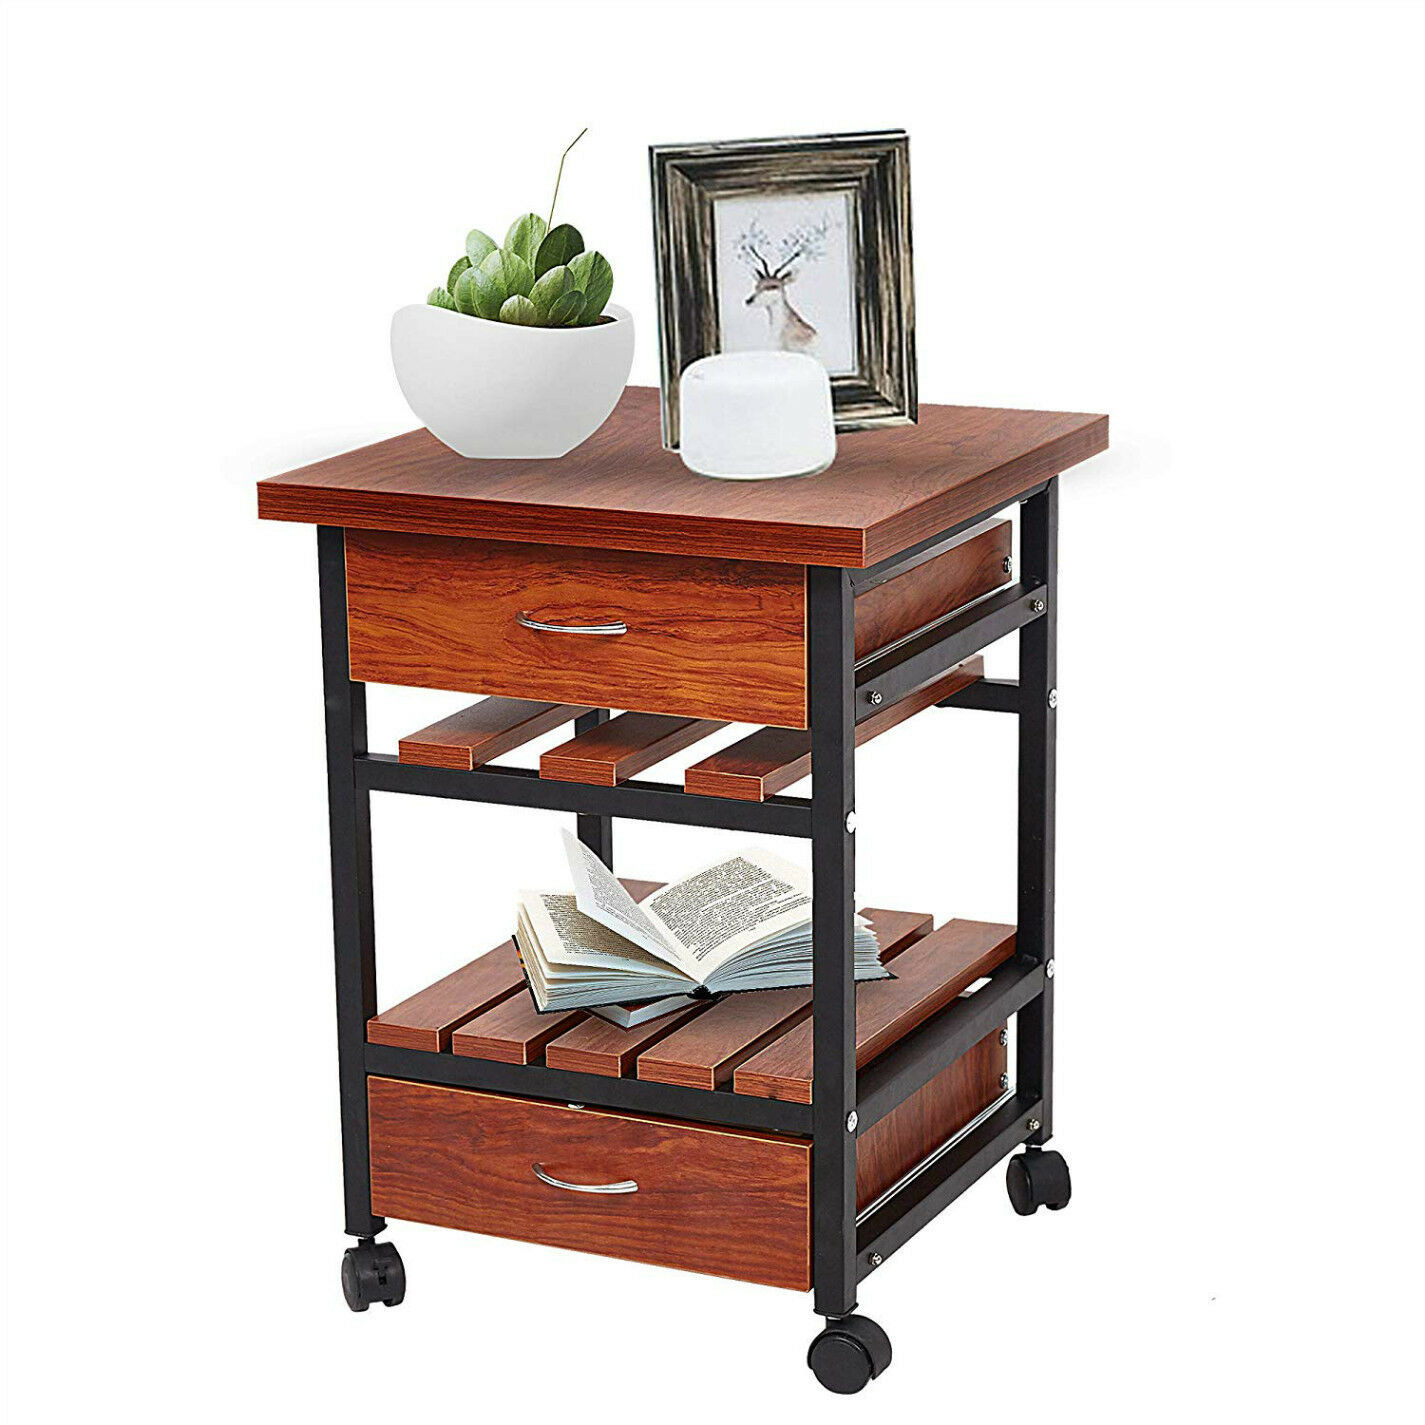 Small Bedroom Table
 Bedside Table with Drawers Rolling Nightstand Small End